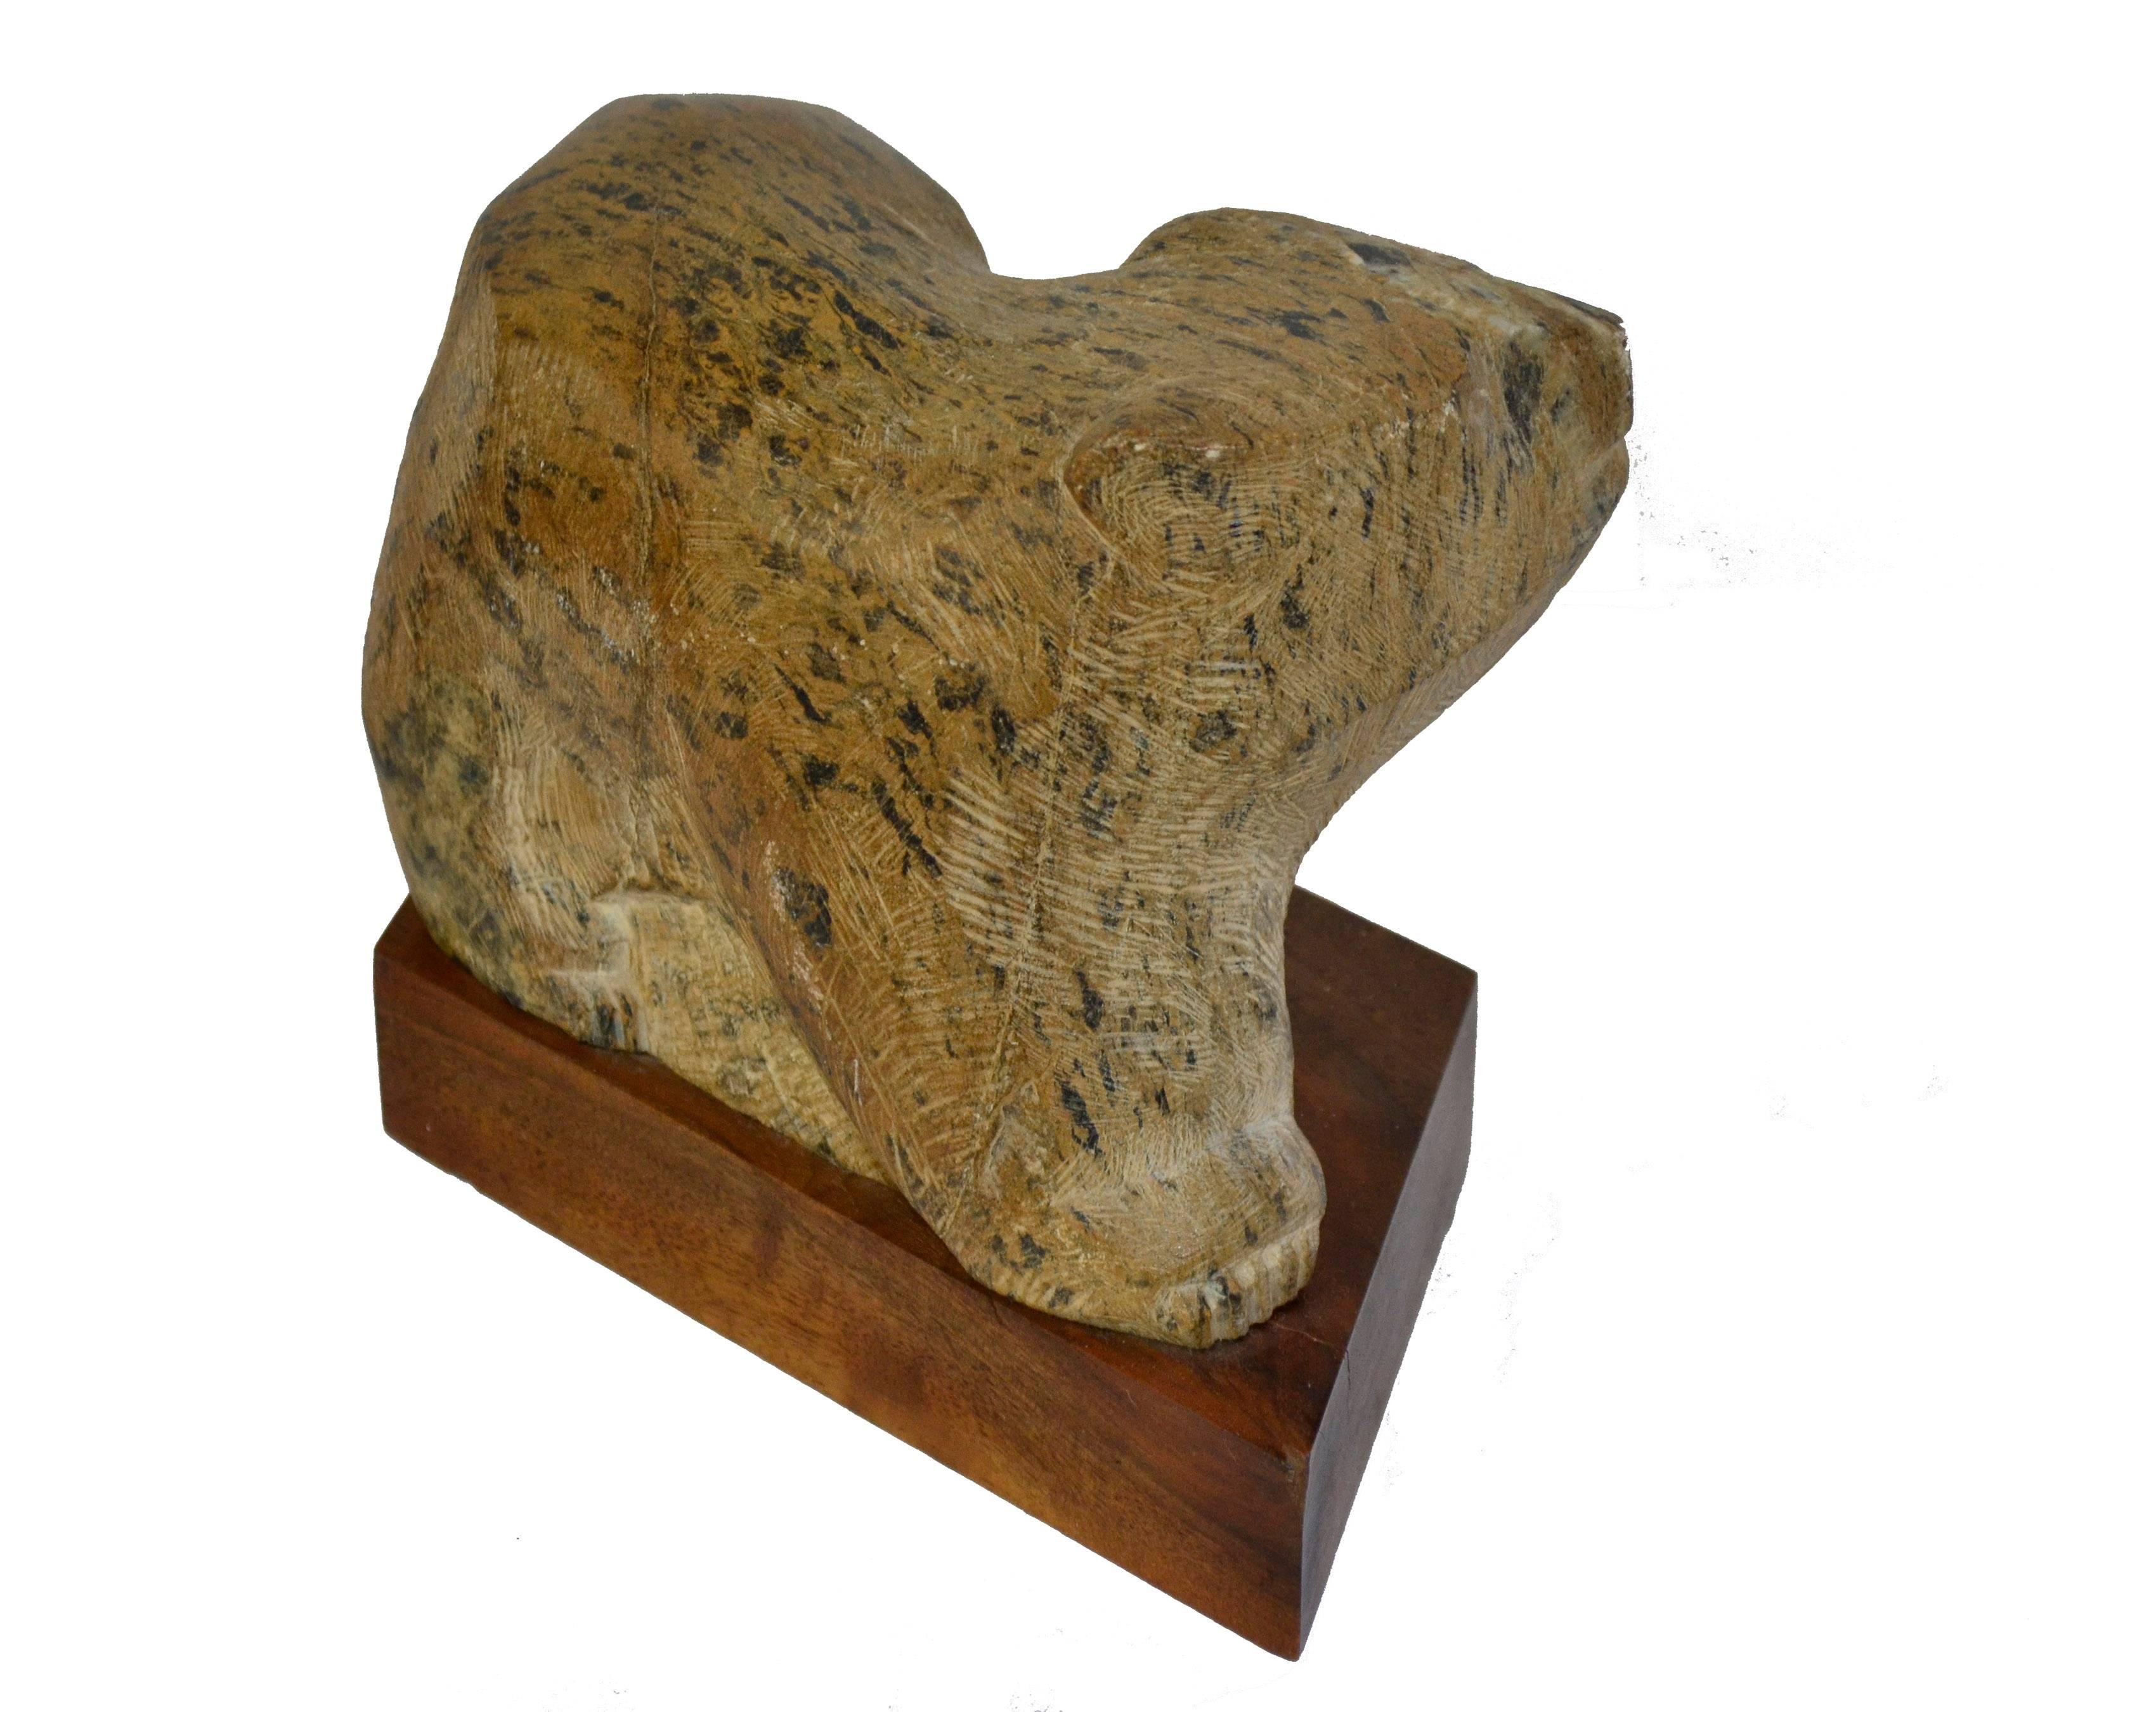 Steatite soapstone sculpture by Paul Buckner (American, 1933-2014) titled "Sunday Afternoon (Bear)". Presented on angled wood plinth. Buckner is a noted sculptor and Professor Emeritus at the University of Oregon's Department of Art.